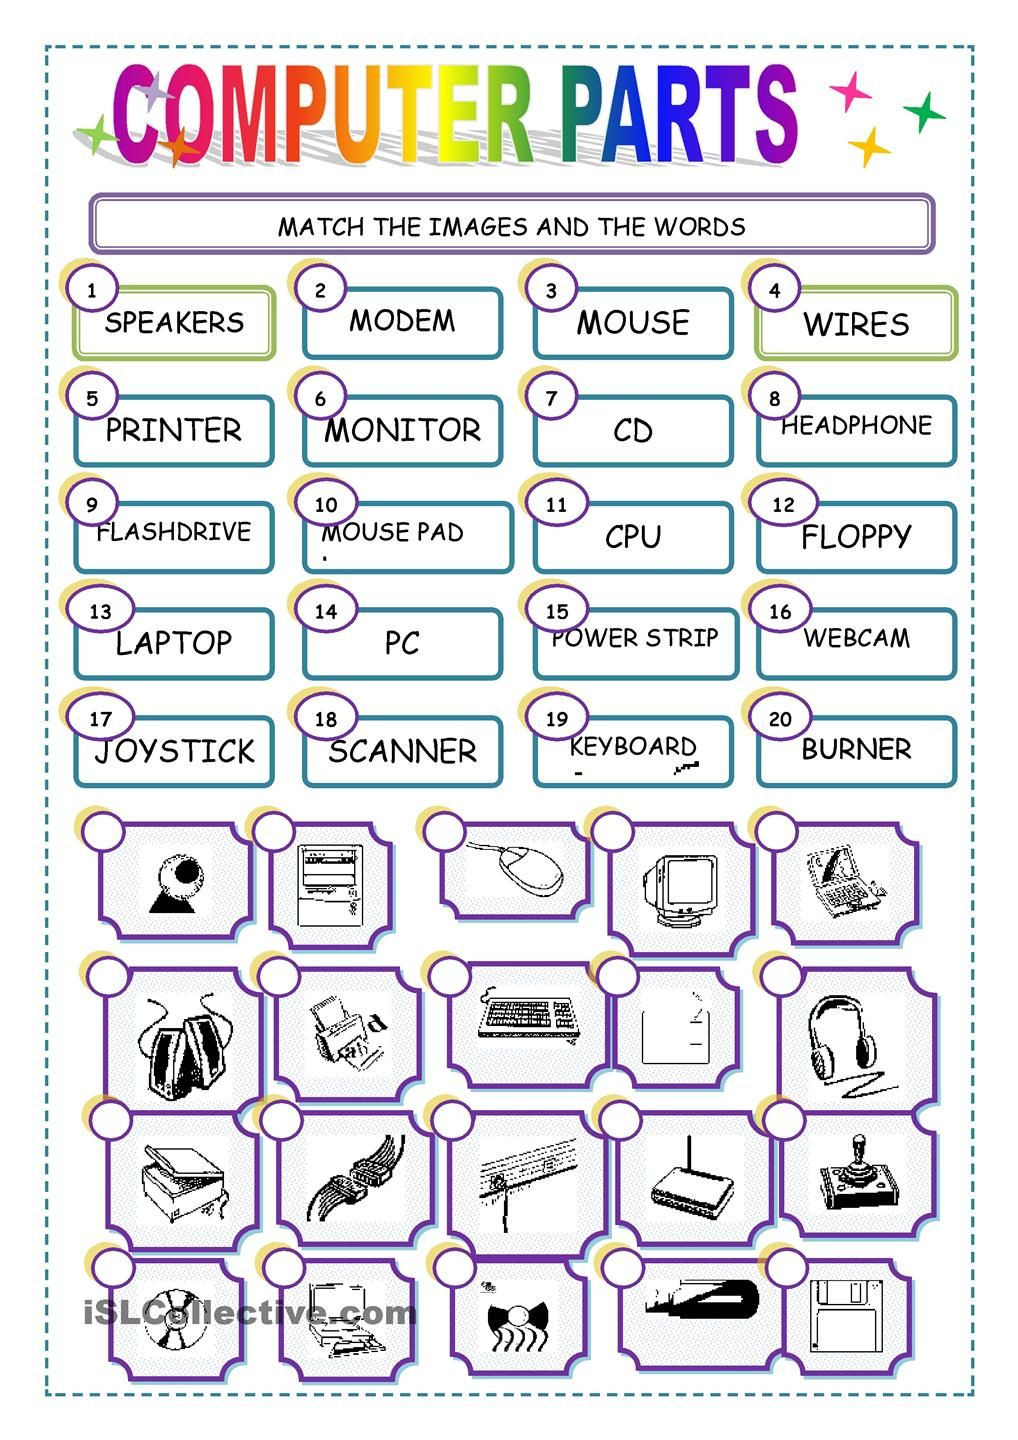 Free Printable Keyboarding Worksheets Match the Puter Parts